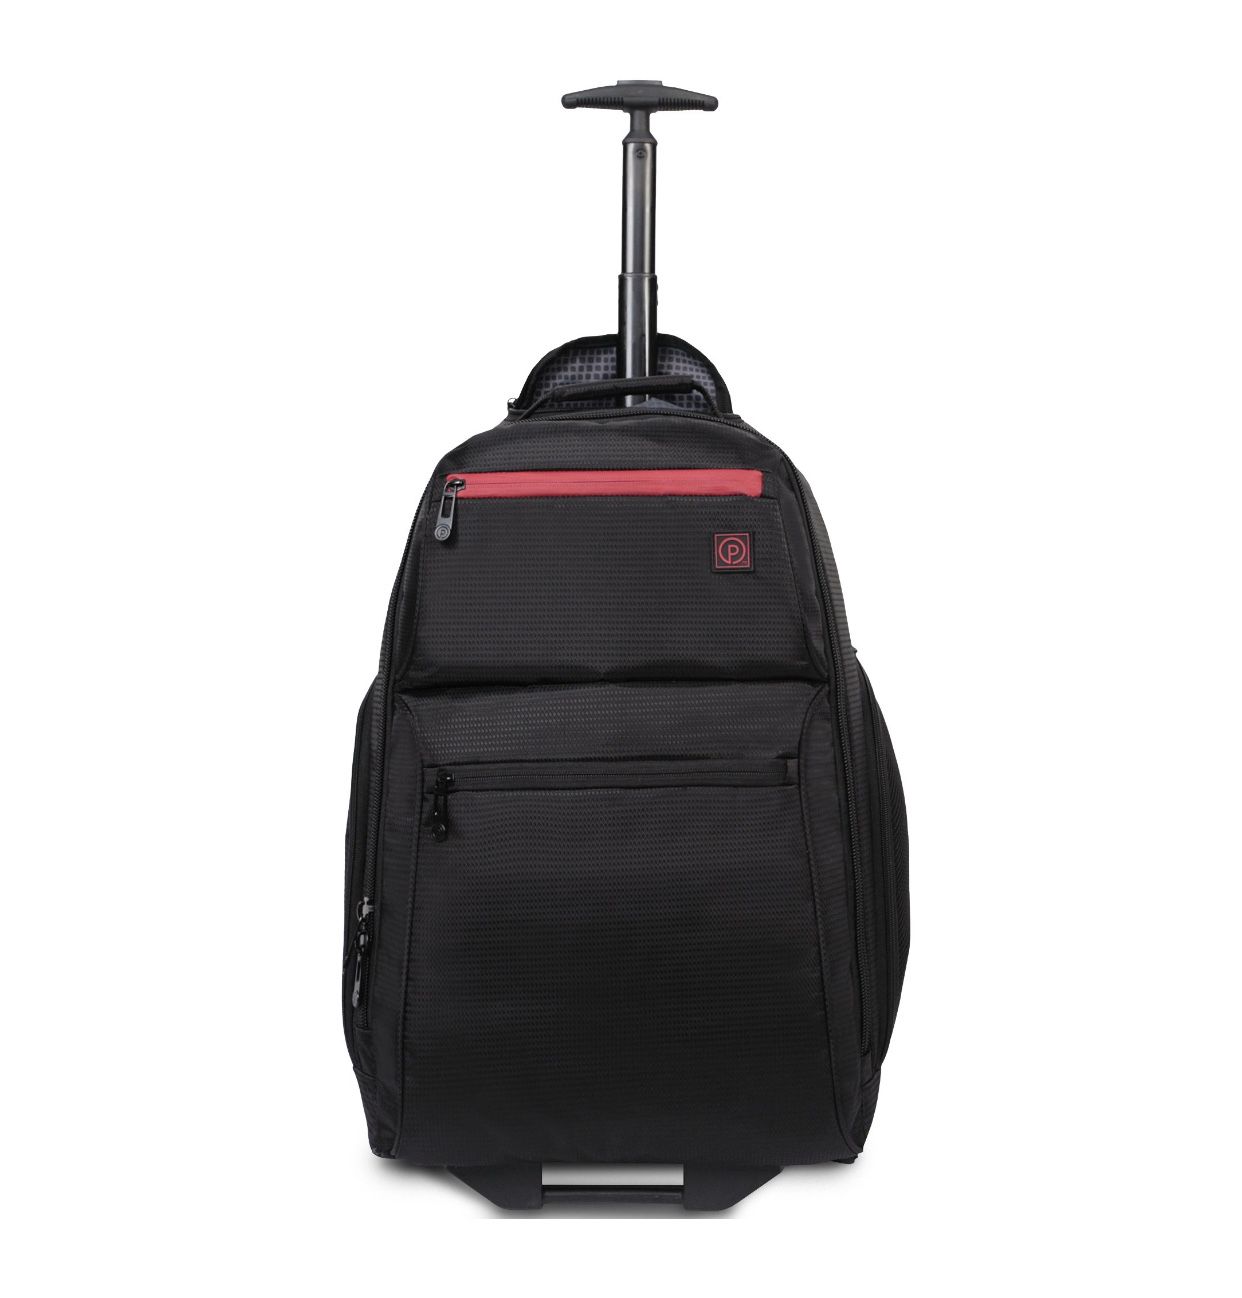 Protege 22-inch Rolling Backpack with Telescopic Handle, Black, In-Line Wheels, 22"L x 14"w x 9"H